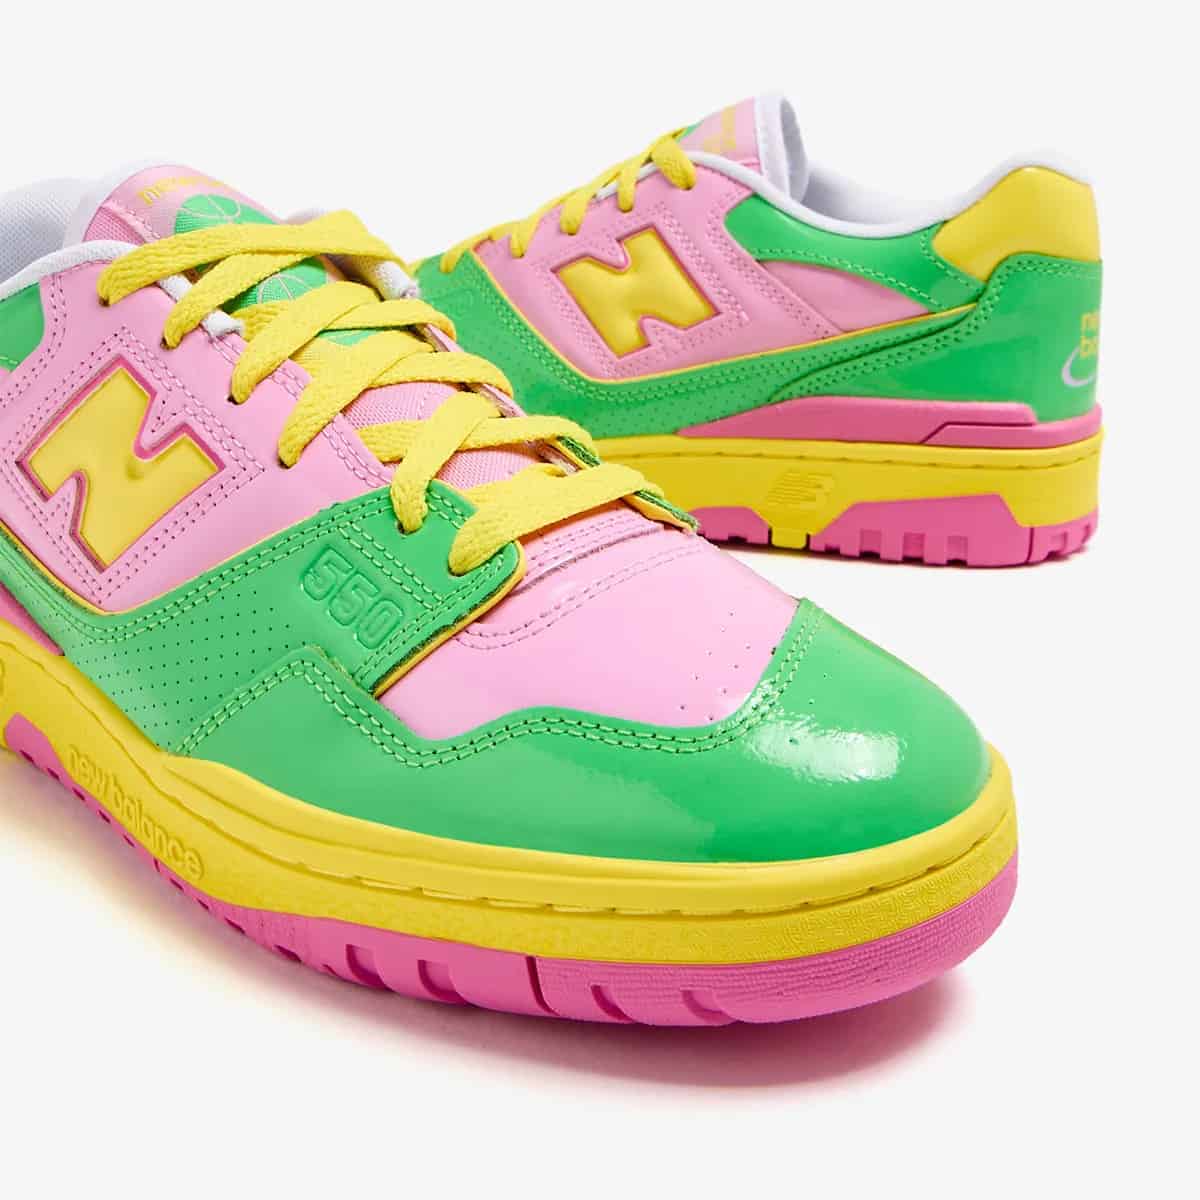 New Balance 550 Y2K-Inspired Sneakers are Finally Here